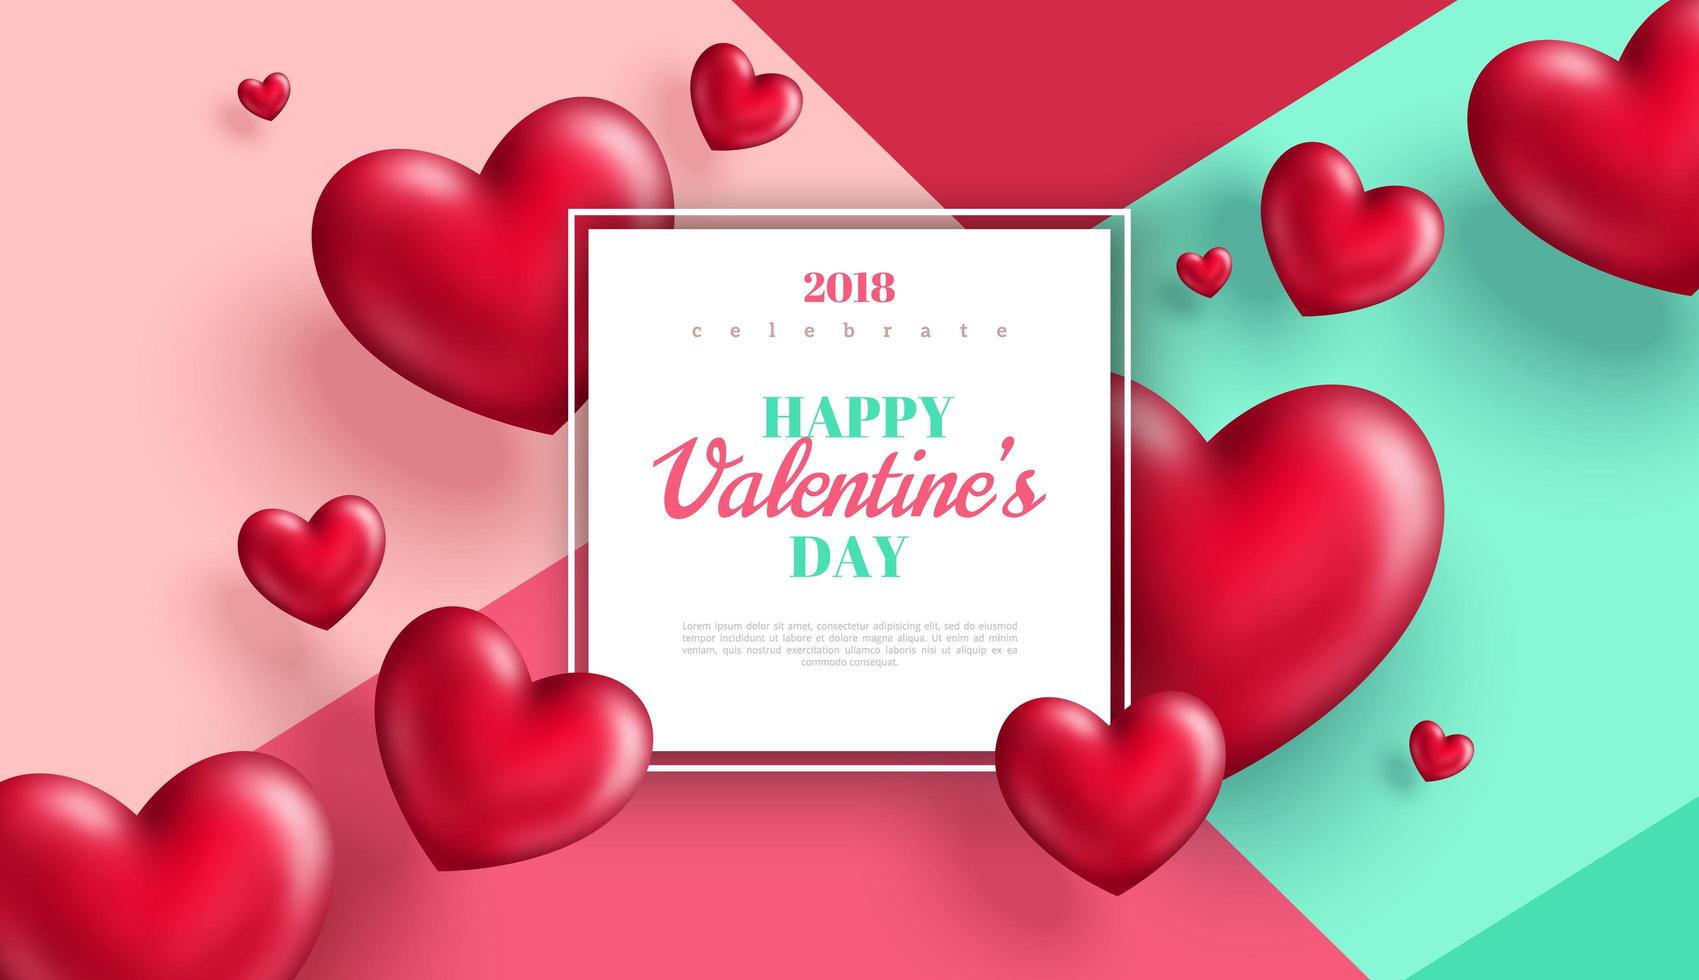 Valentines day banner or greeting card vector